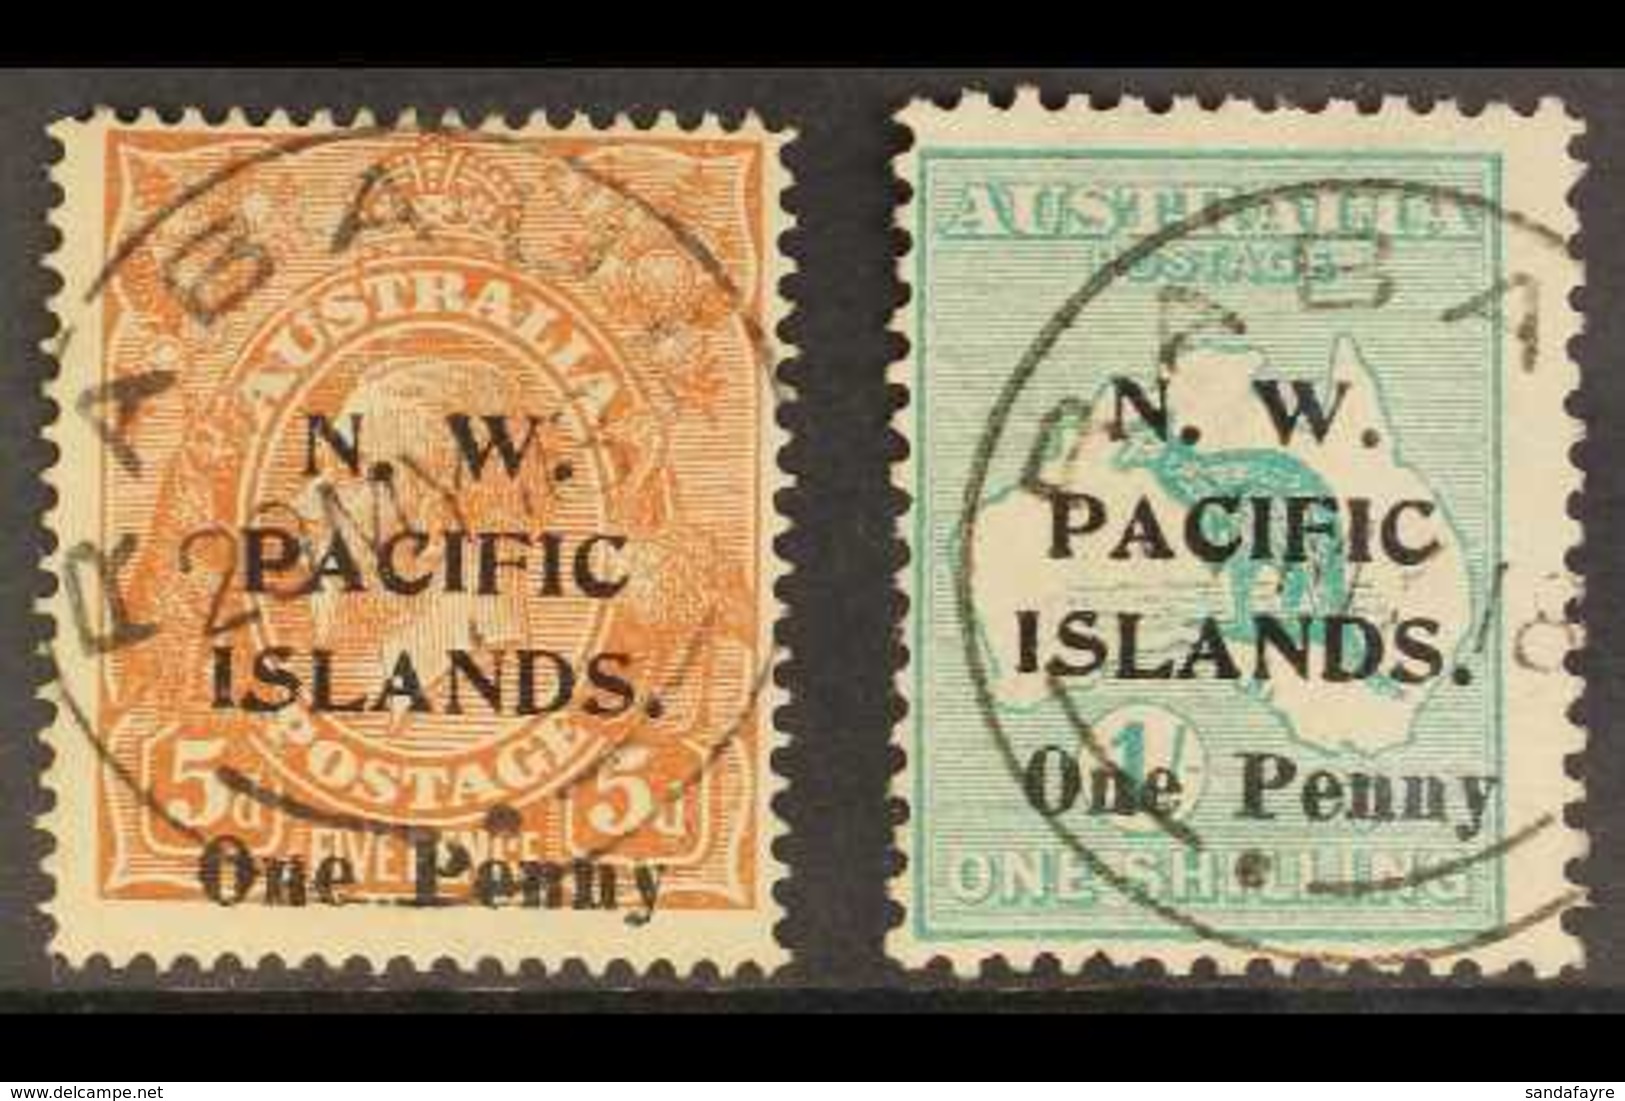 NWPI 1918 Surcharges Complete Set, SG 100/01, Used With "Rabaul" Cds Cancels, Fresh. For More Images, Please Visit Http: - Papua New Guinea